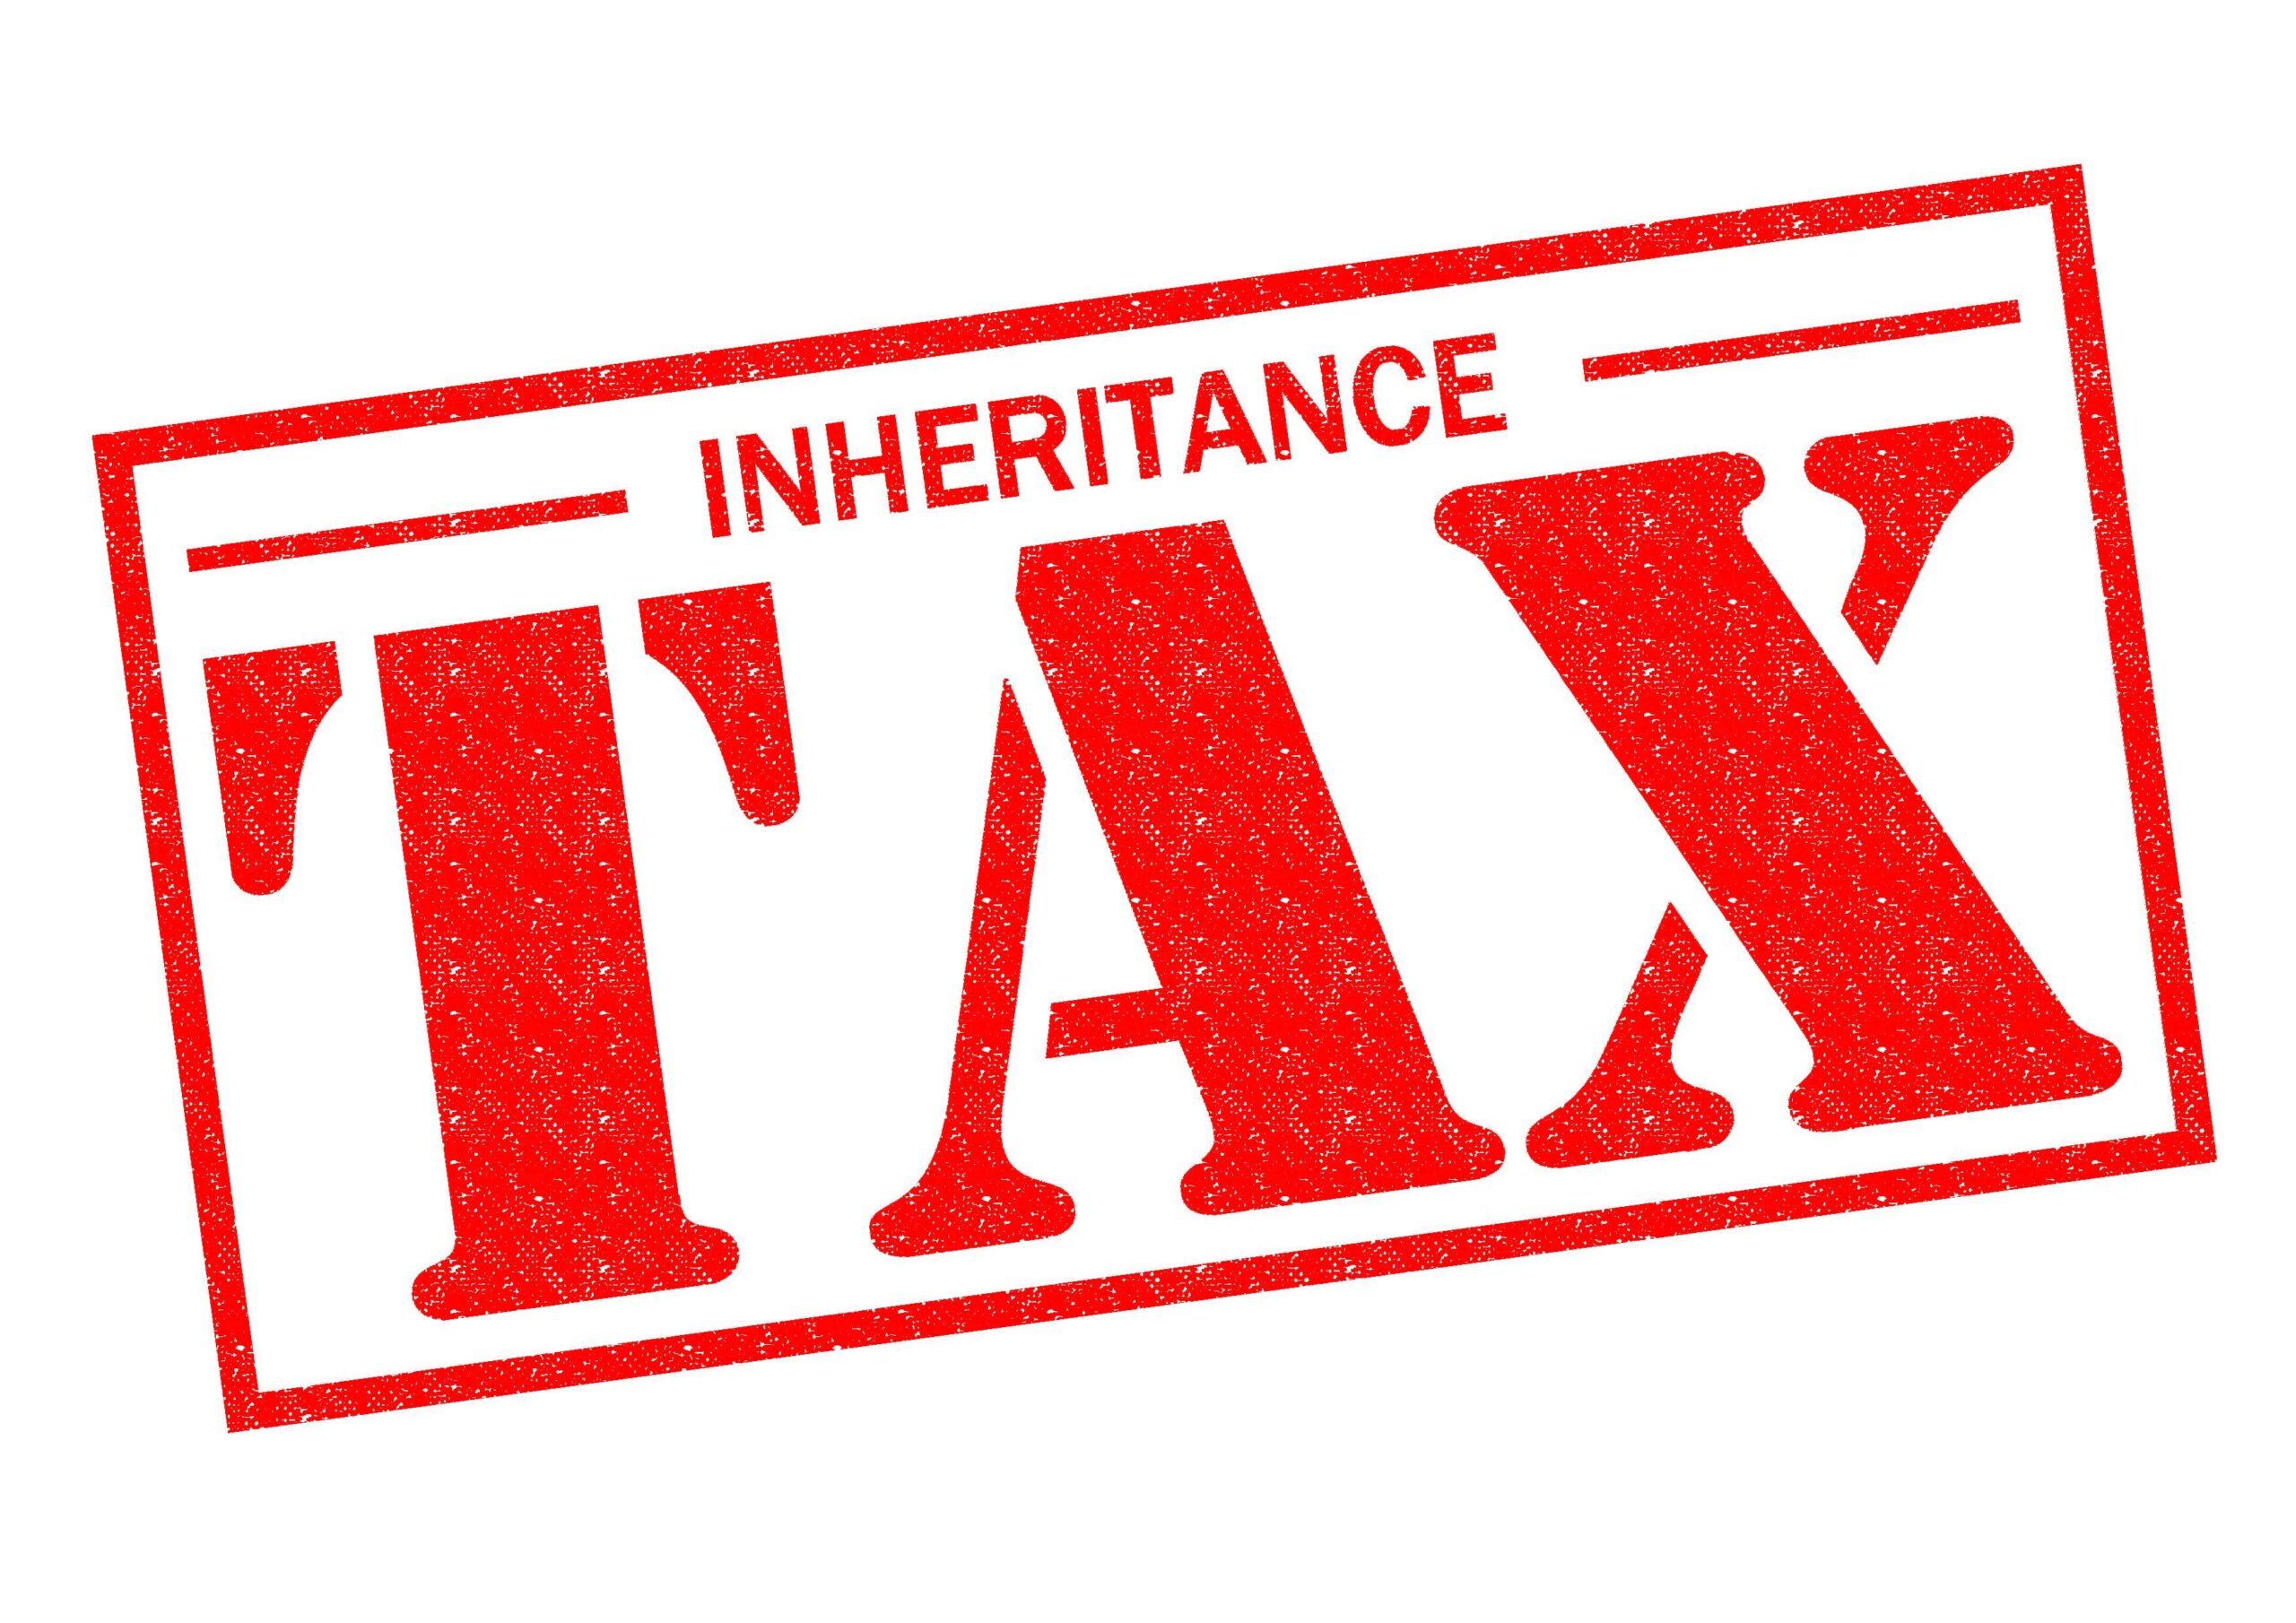 Will you be fueling the inheritance tax bonanza?